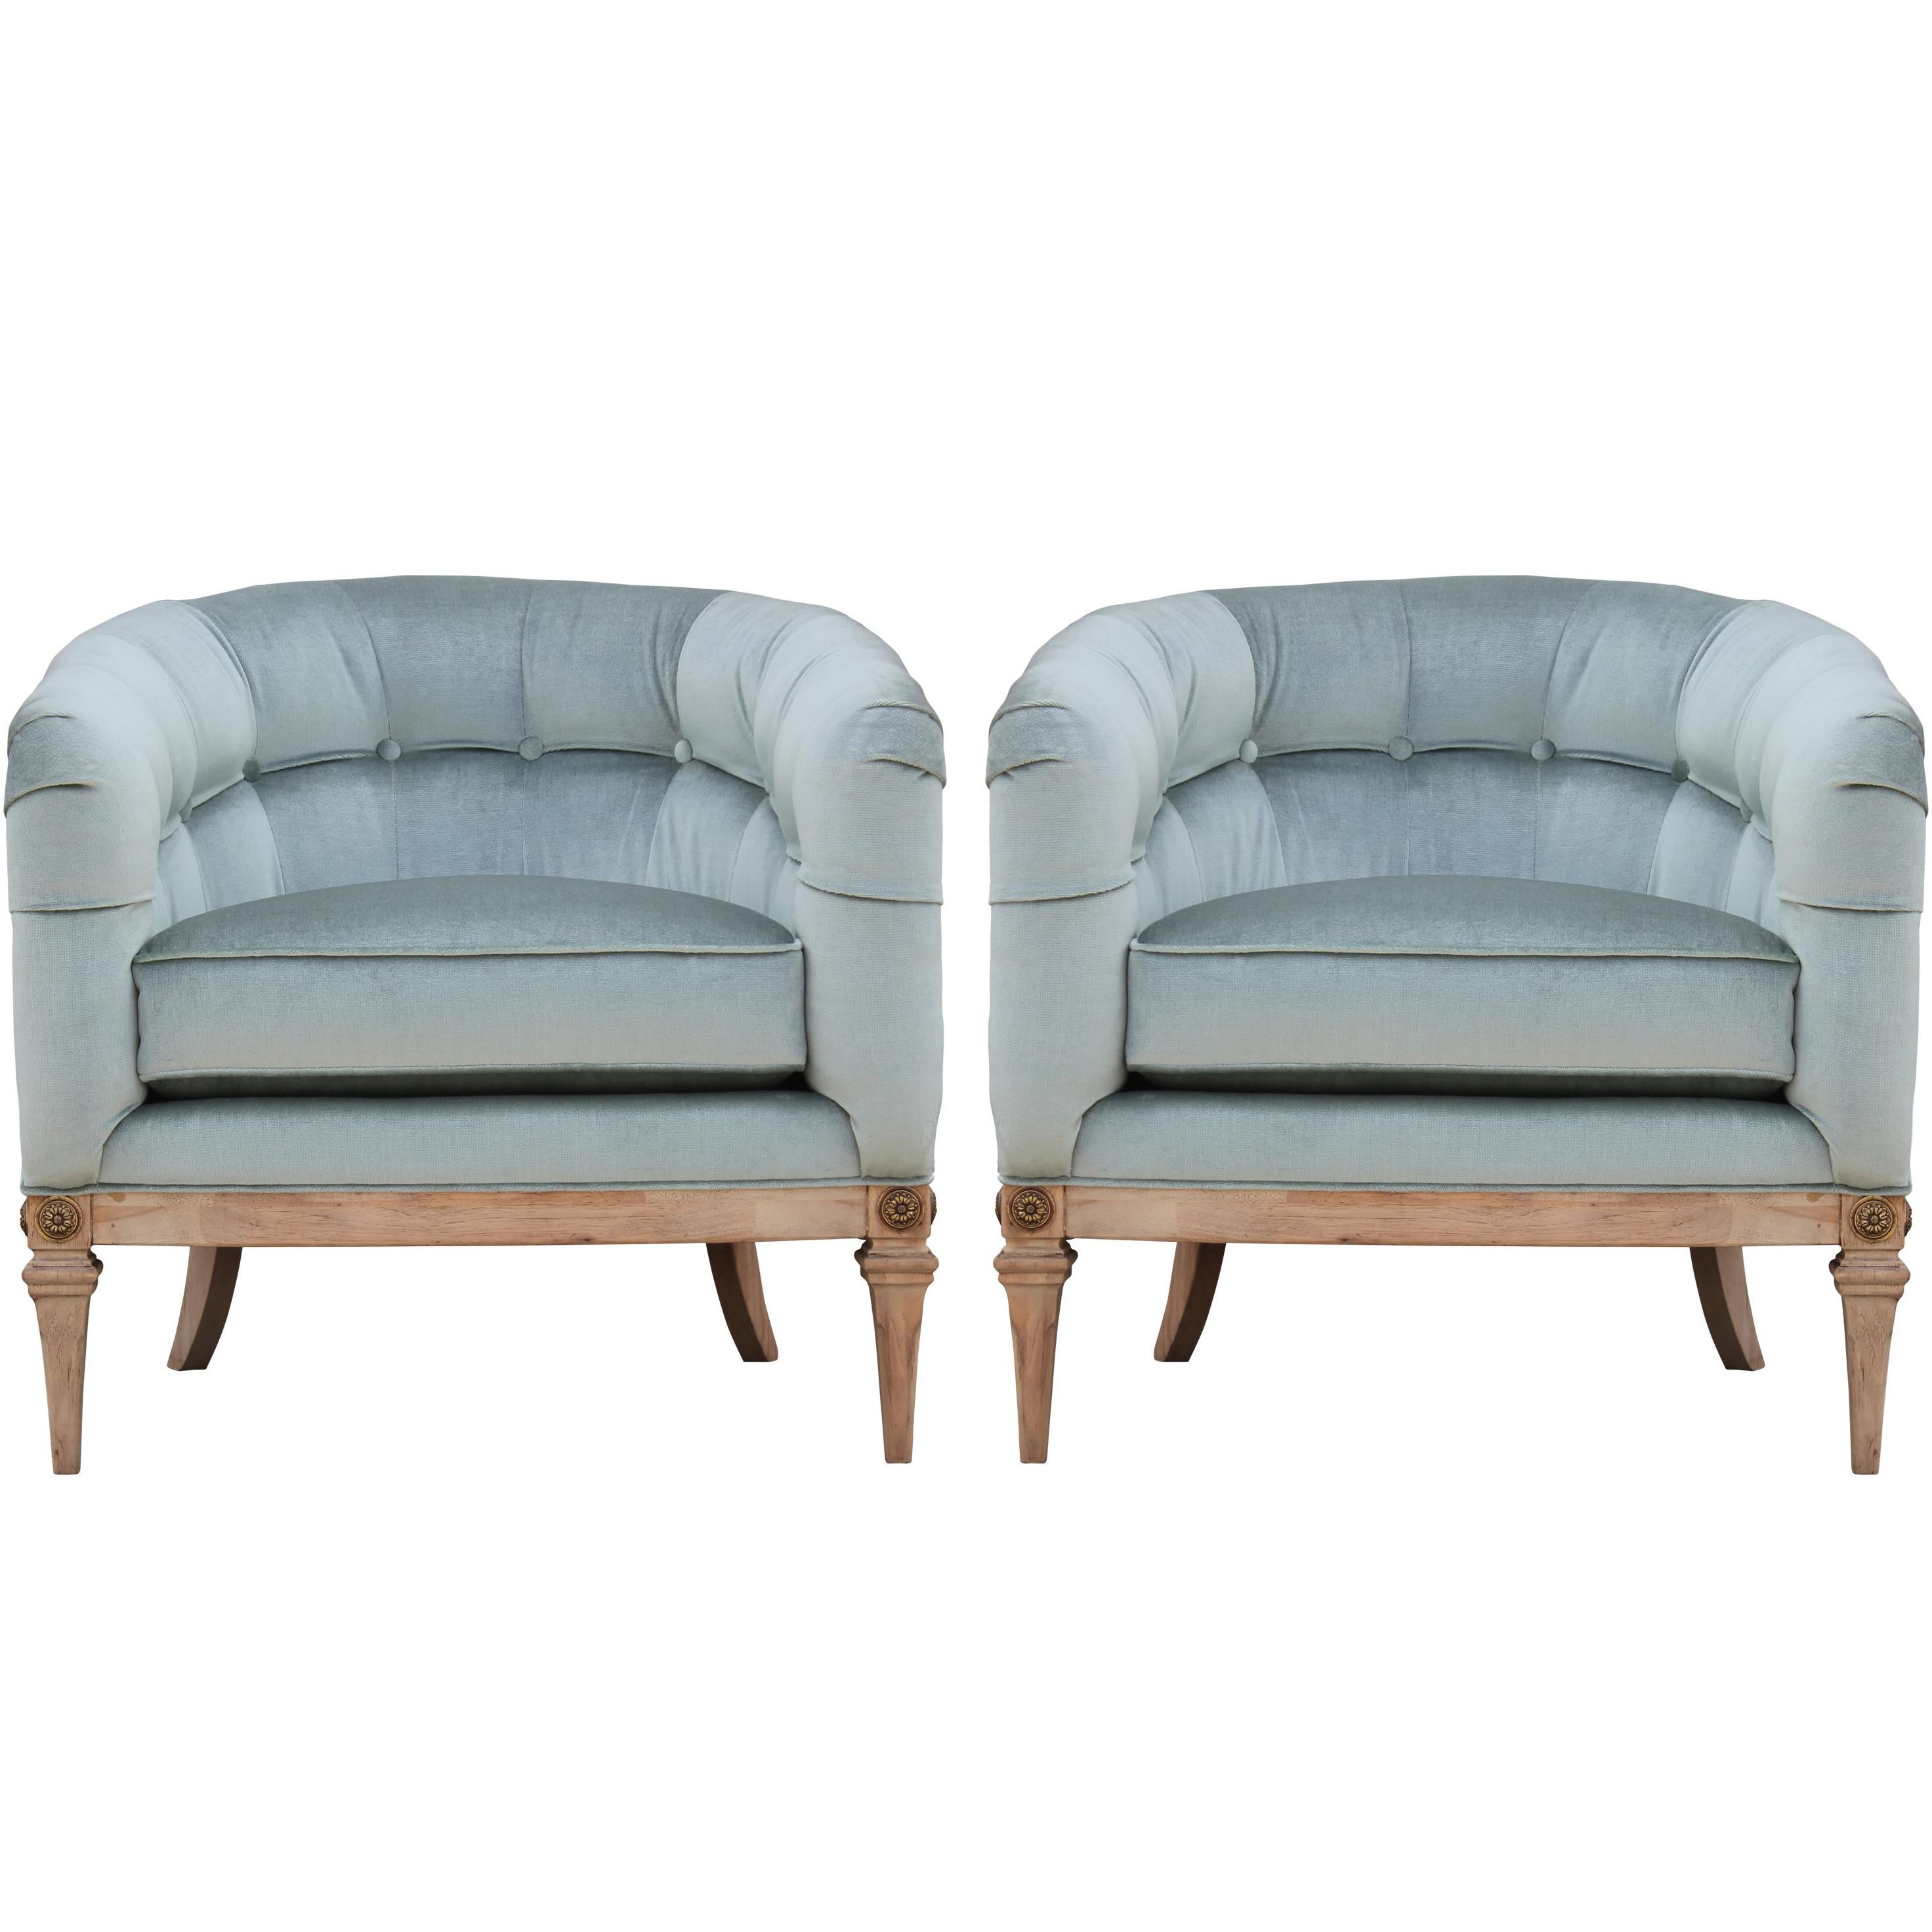 Pair of French Light Blue Velvet and Neutral Finish Barrel Back Lounge Chairs